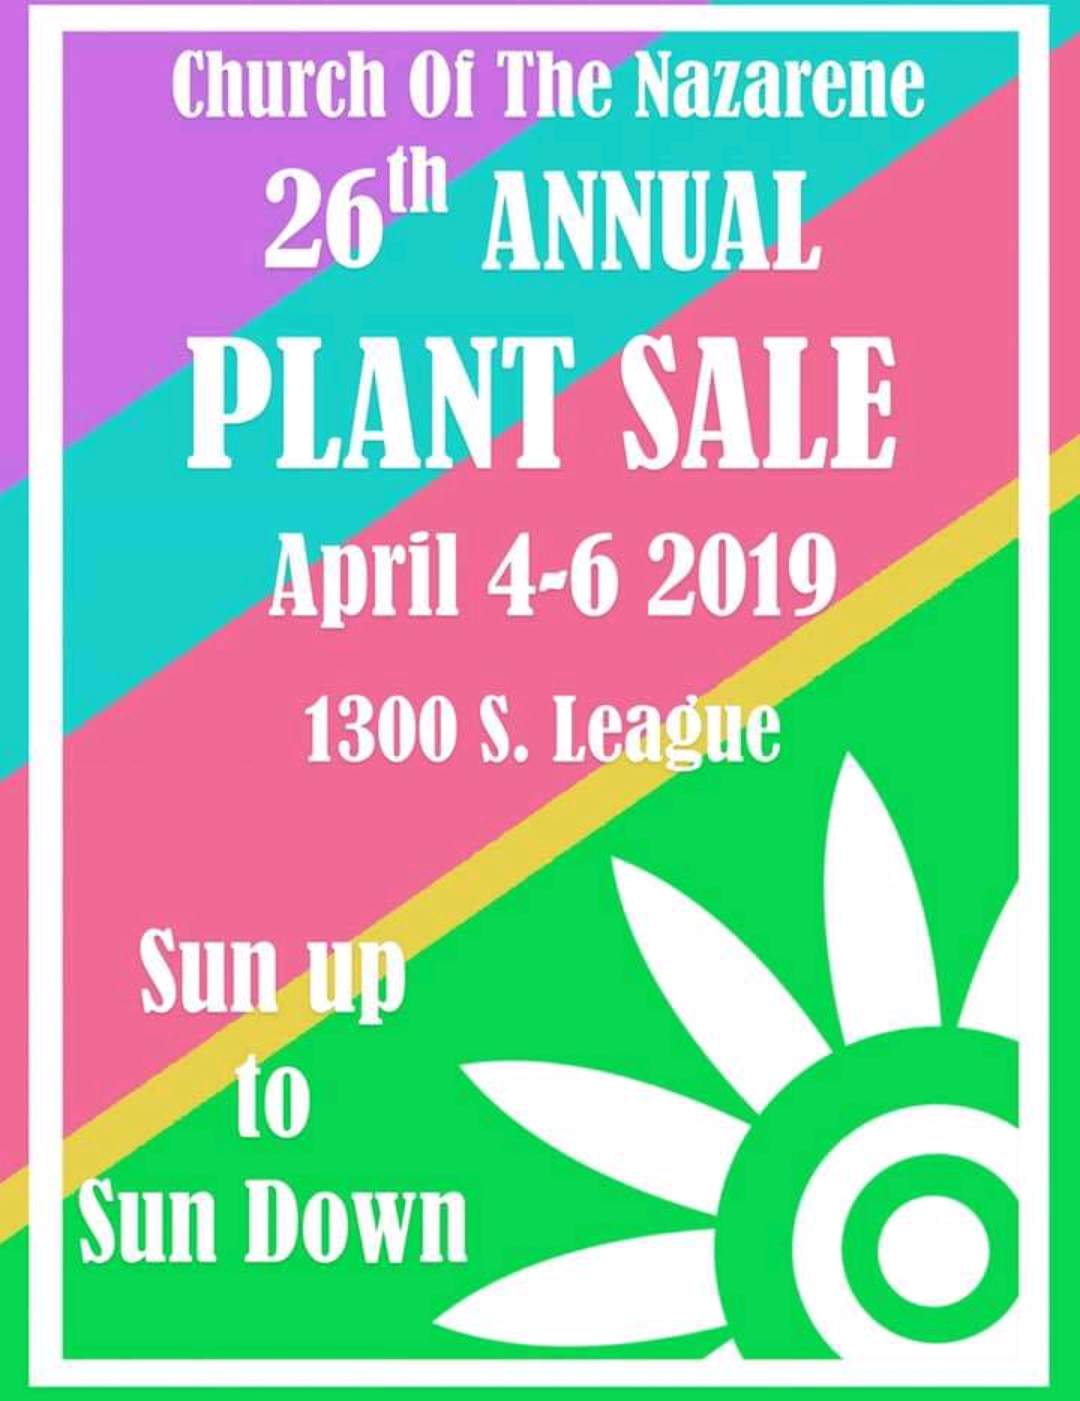 Sulphur Springs Church of the Nazarene Hosting Annual Plant Sale April 4th,5th, and 6th